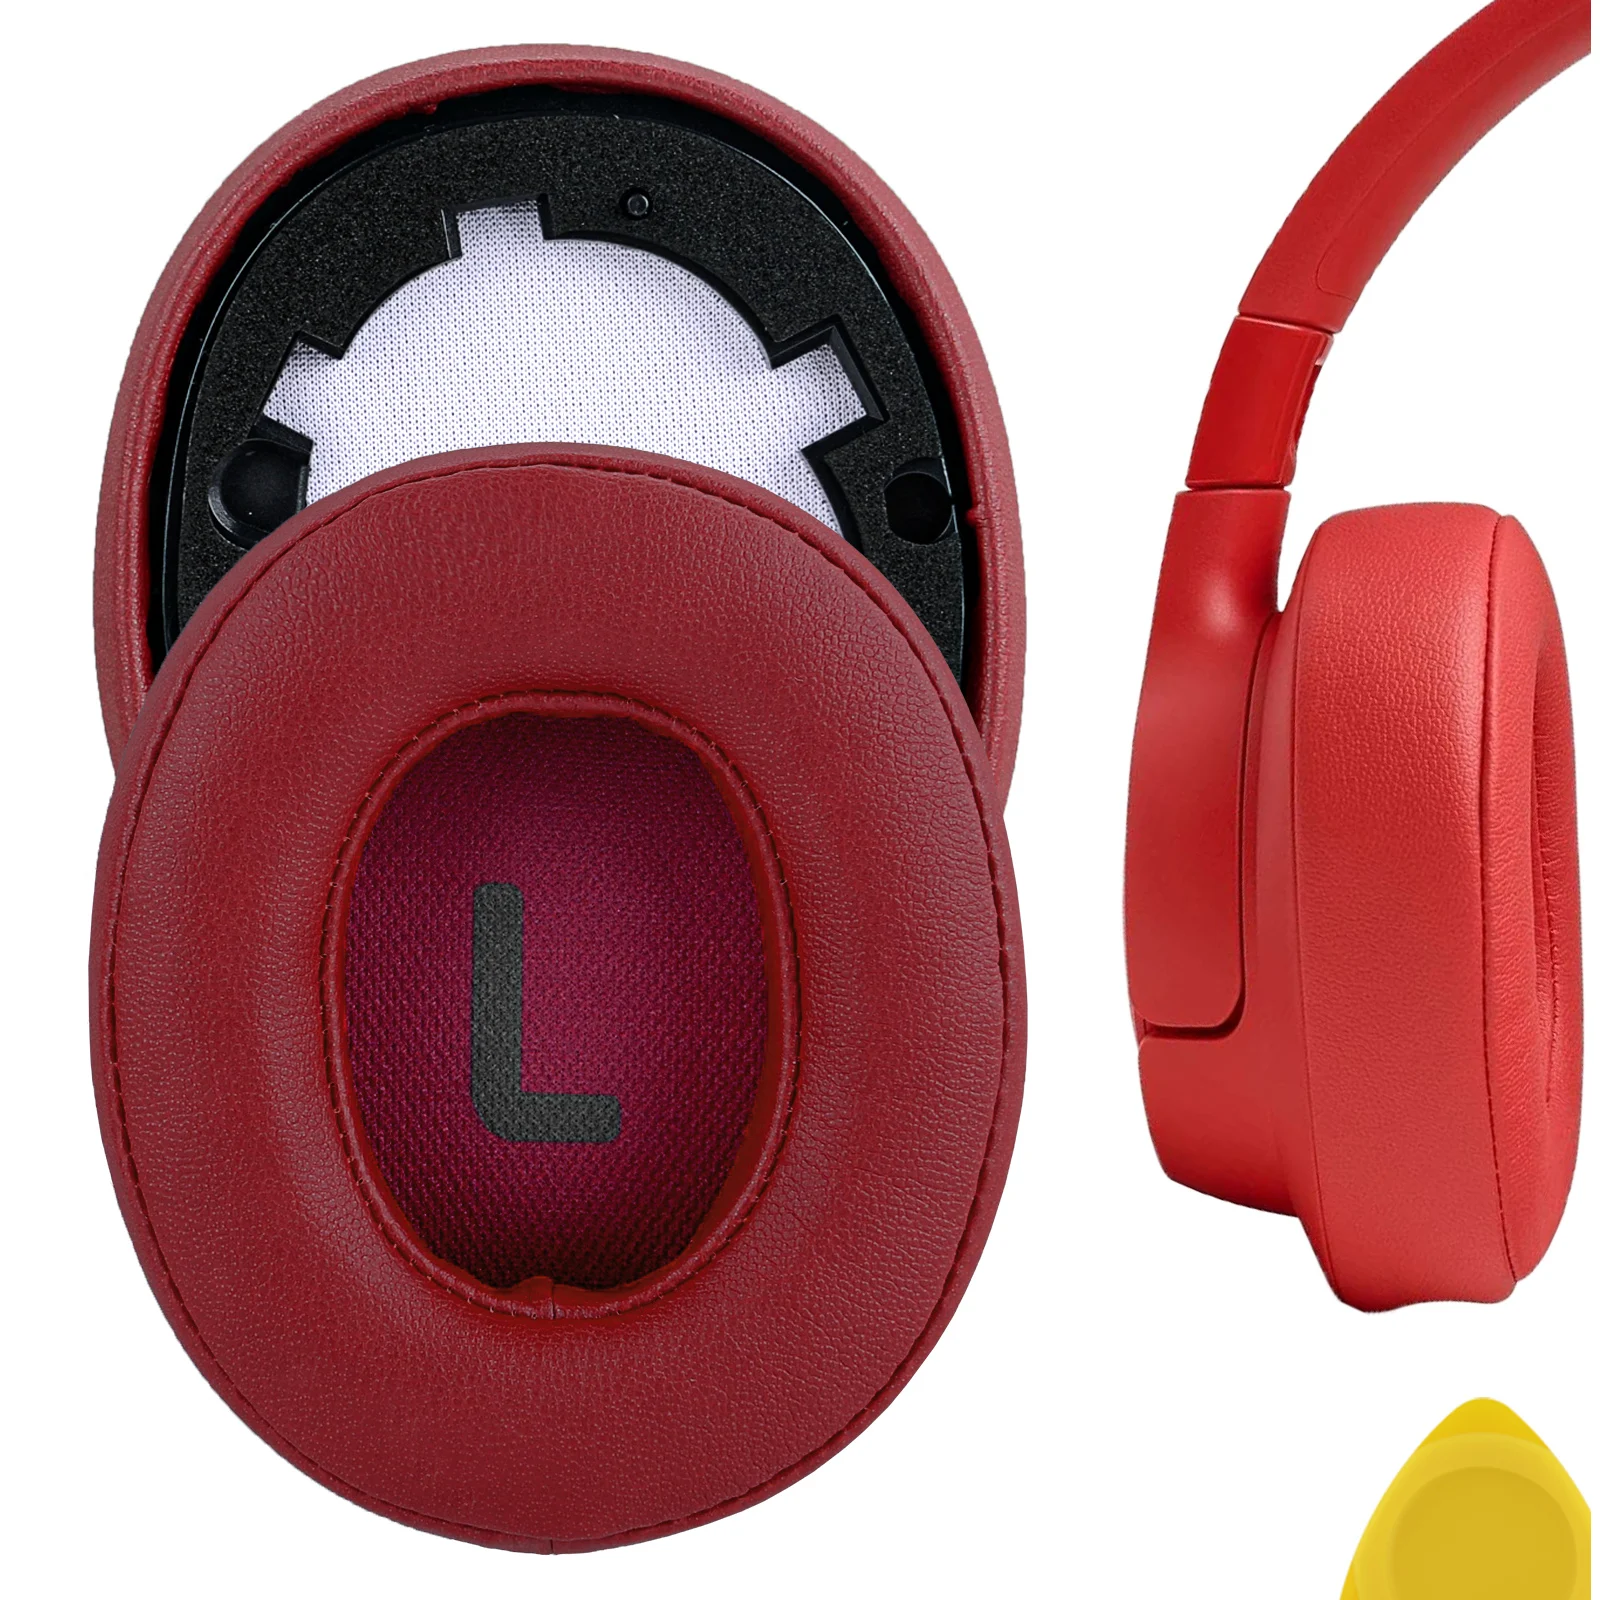 

Geekria QuickFit Replacement Ear Pads for JBL Tune 700BT, Tune 750BTNC Wireless Over-Ear Headphones